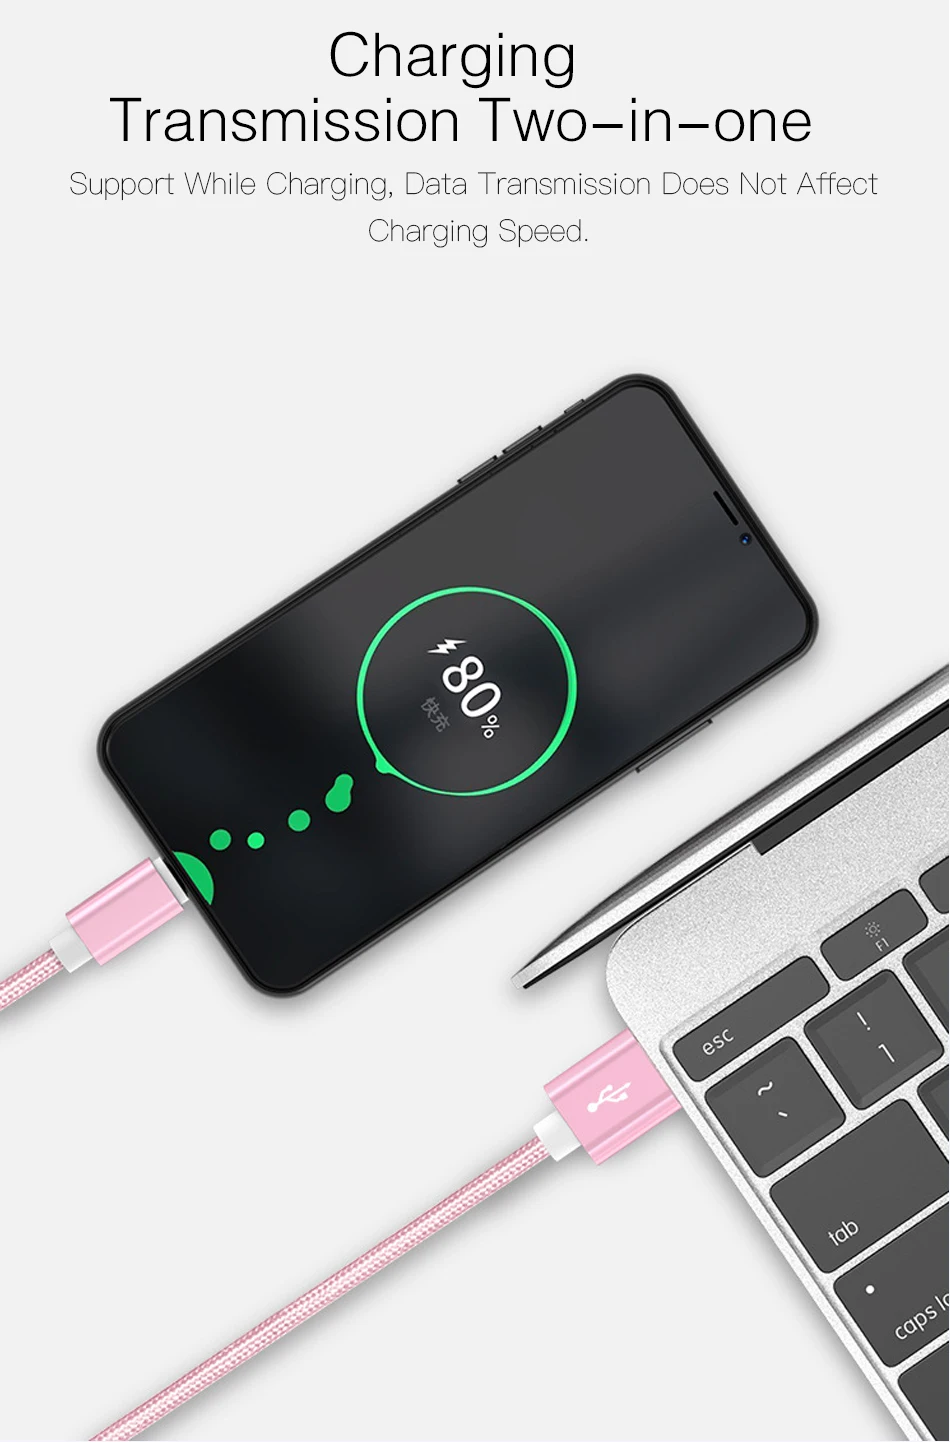 mobile phone chargers Travel Mobile Phone Charger 18W quick Charge USB Adapter Type C USB Cable For Samsung Galaxy Z Flip 3 5G S21 S10 A50 A30s A03s powerbank quick charge 3.0